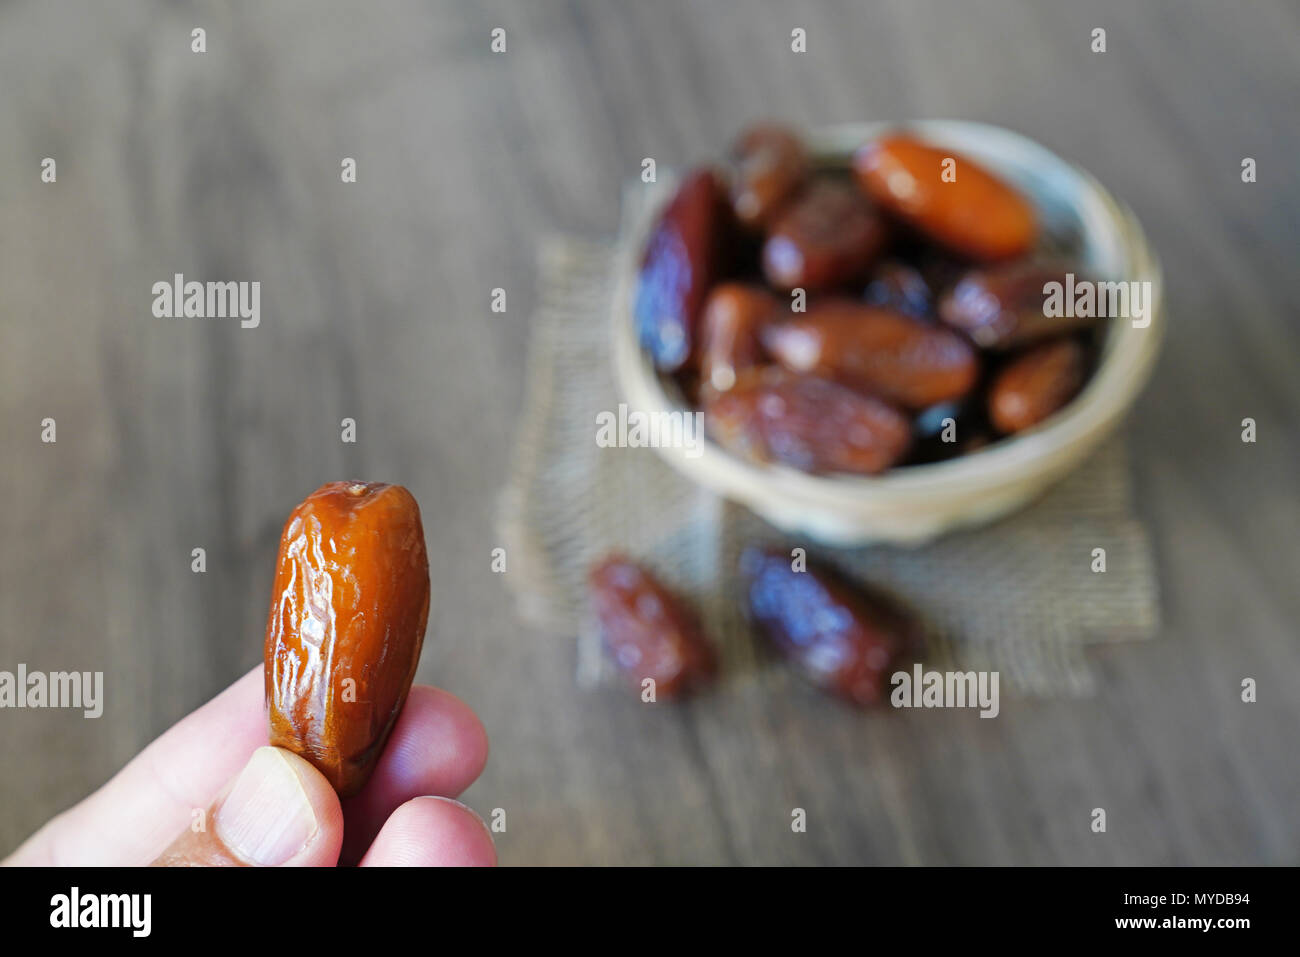 Human finger holding single date fruit and blurred dates filled bowl in background Stock Photo